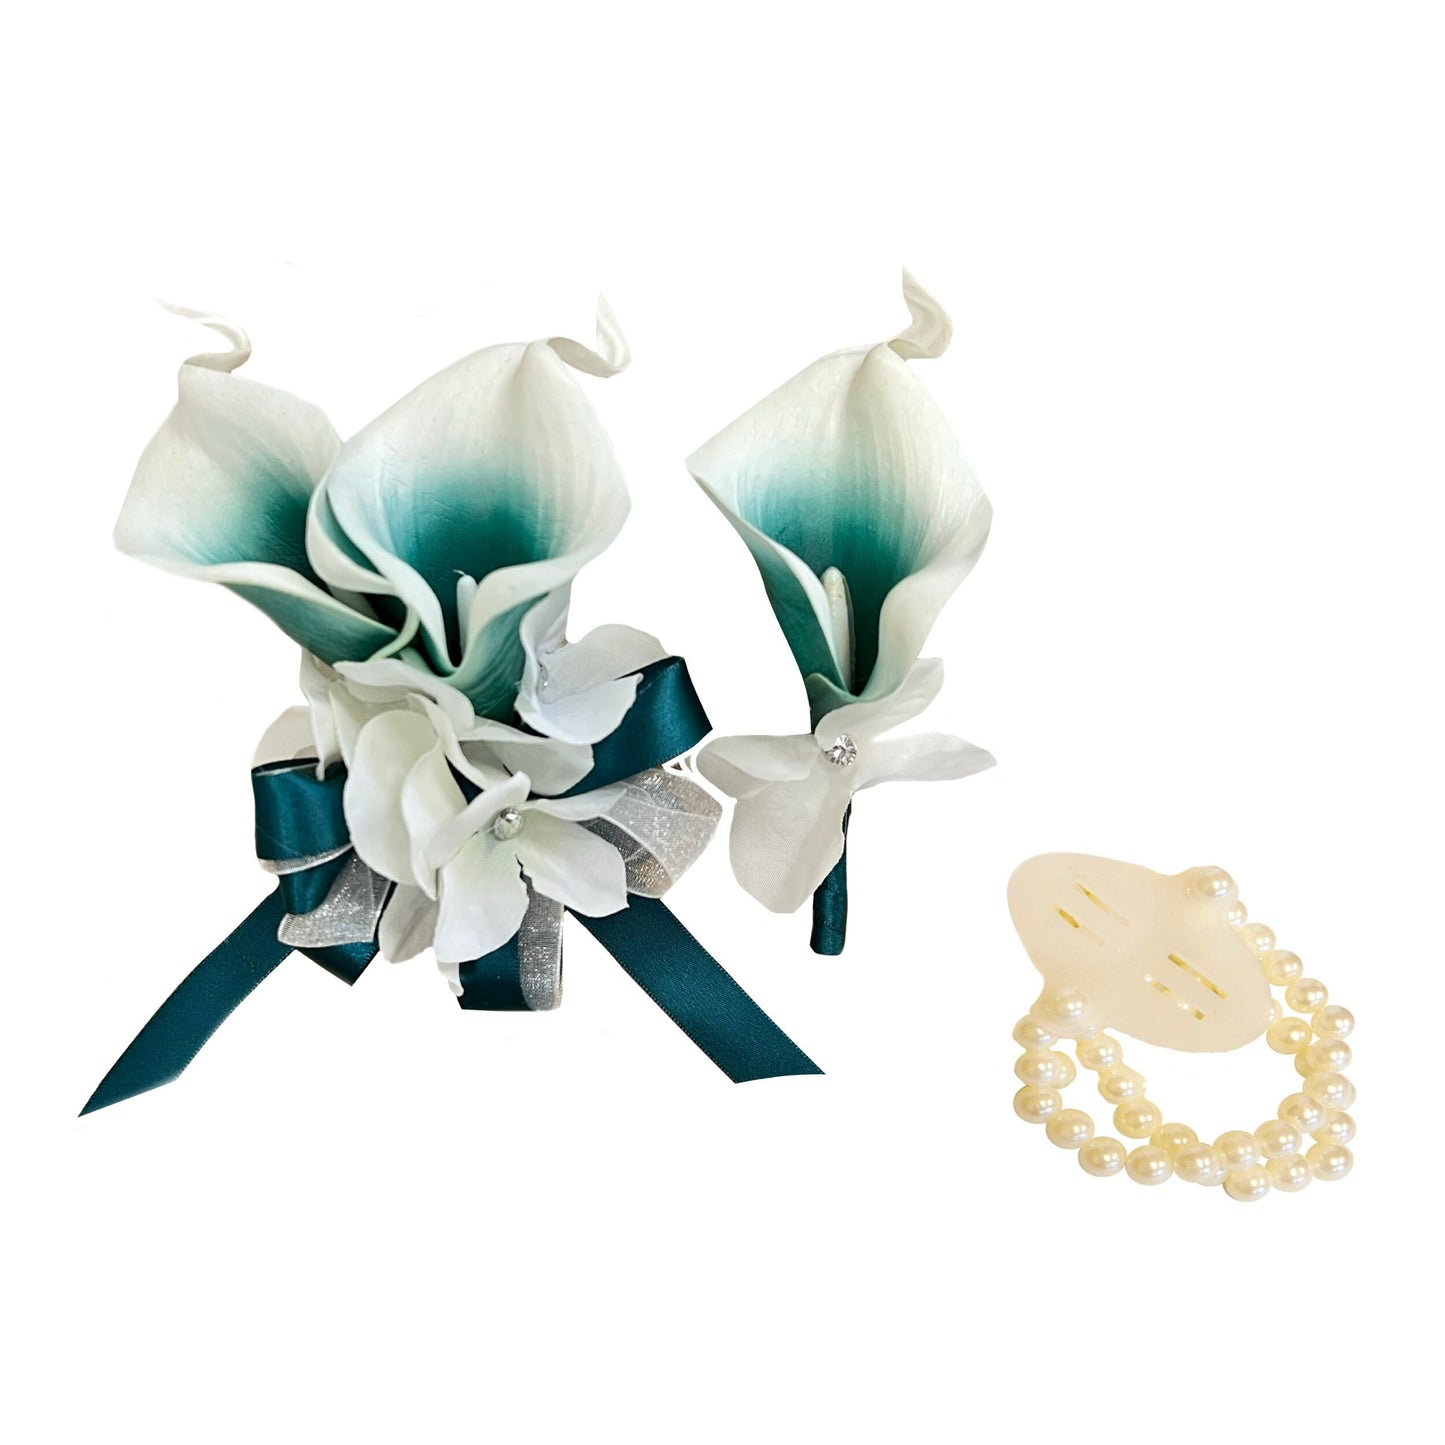 Teal Calla Lily Wedding Corsage & Boutonniere Set with Pearls & Rhinestones